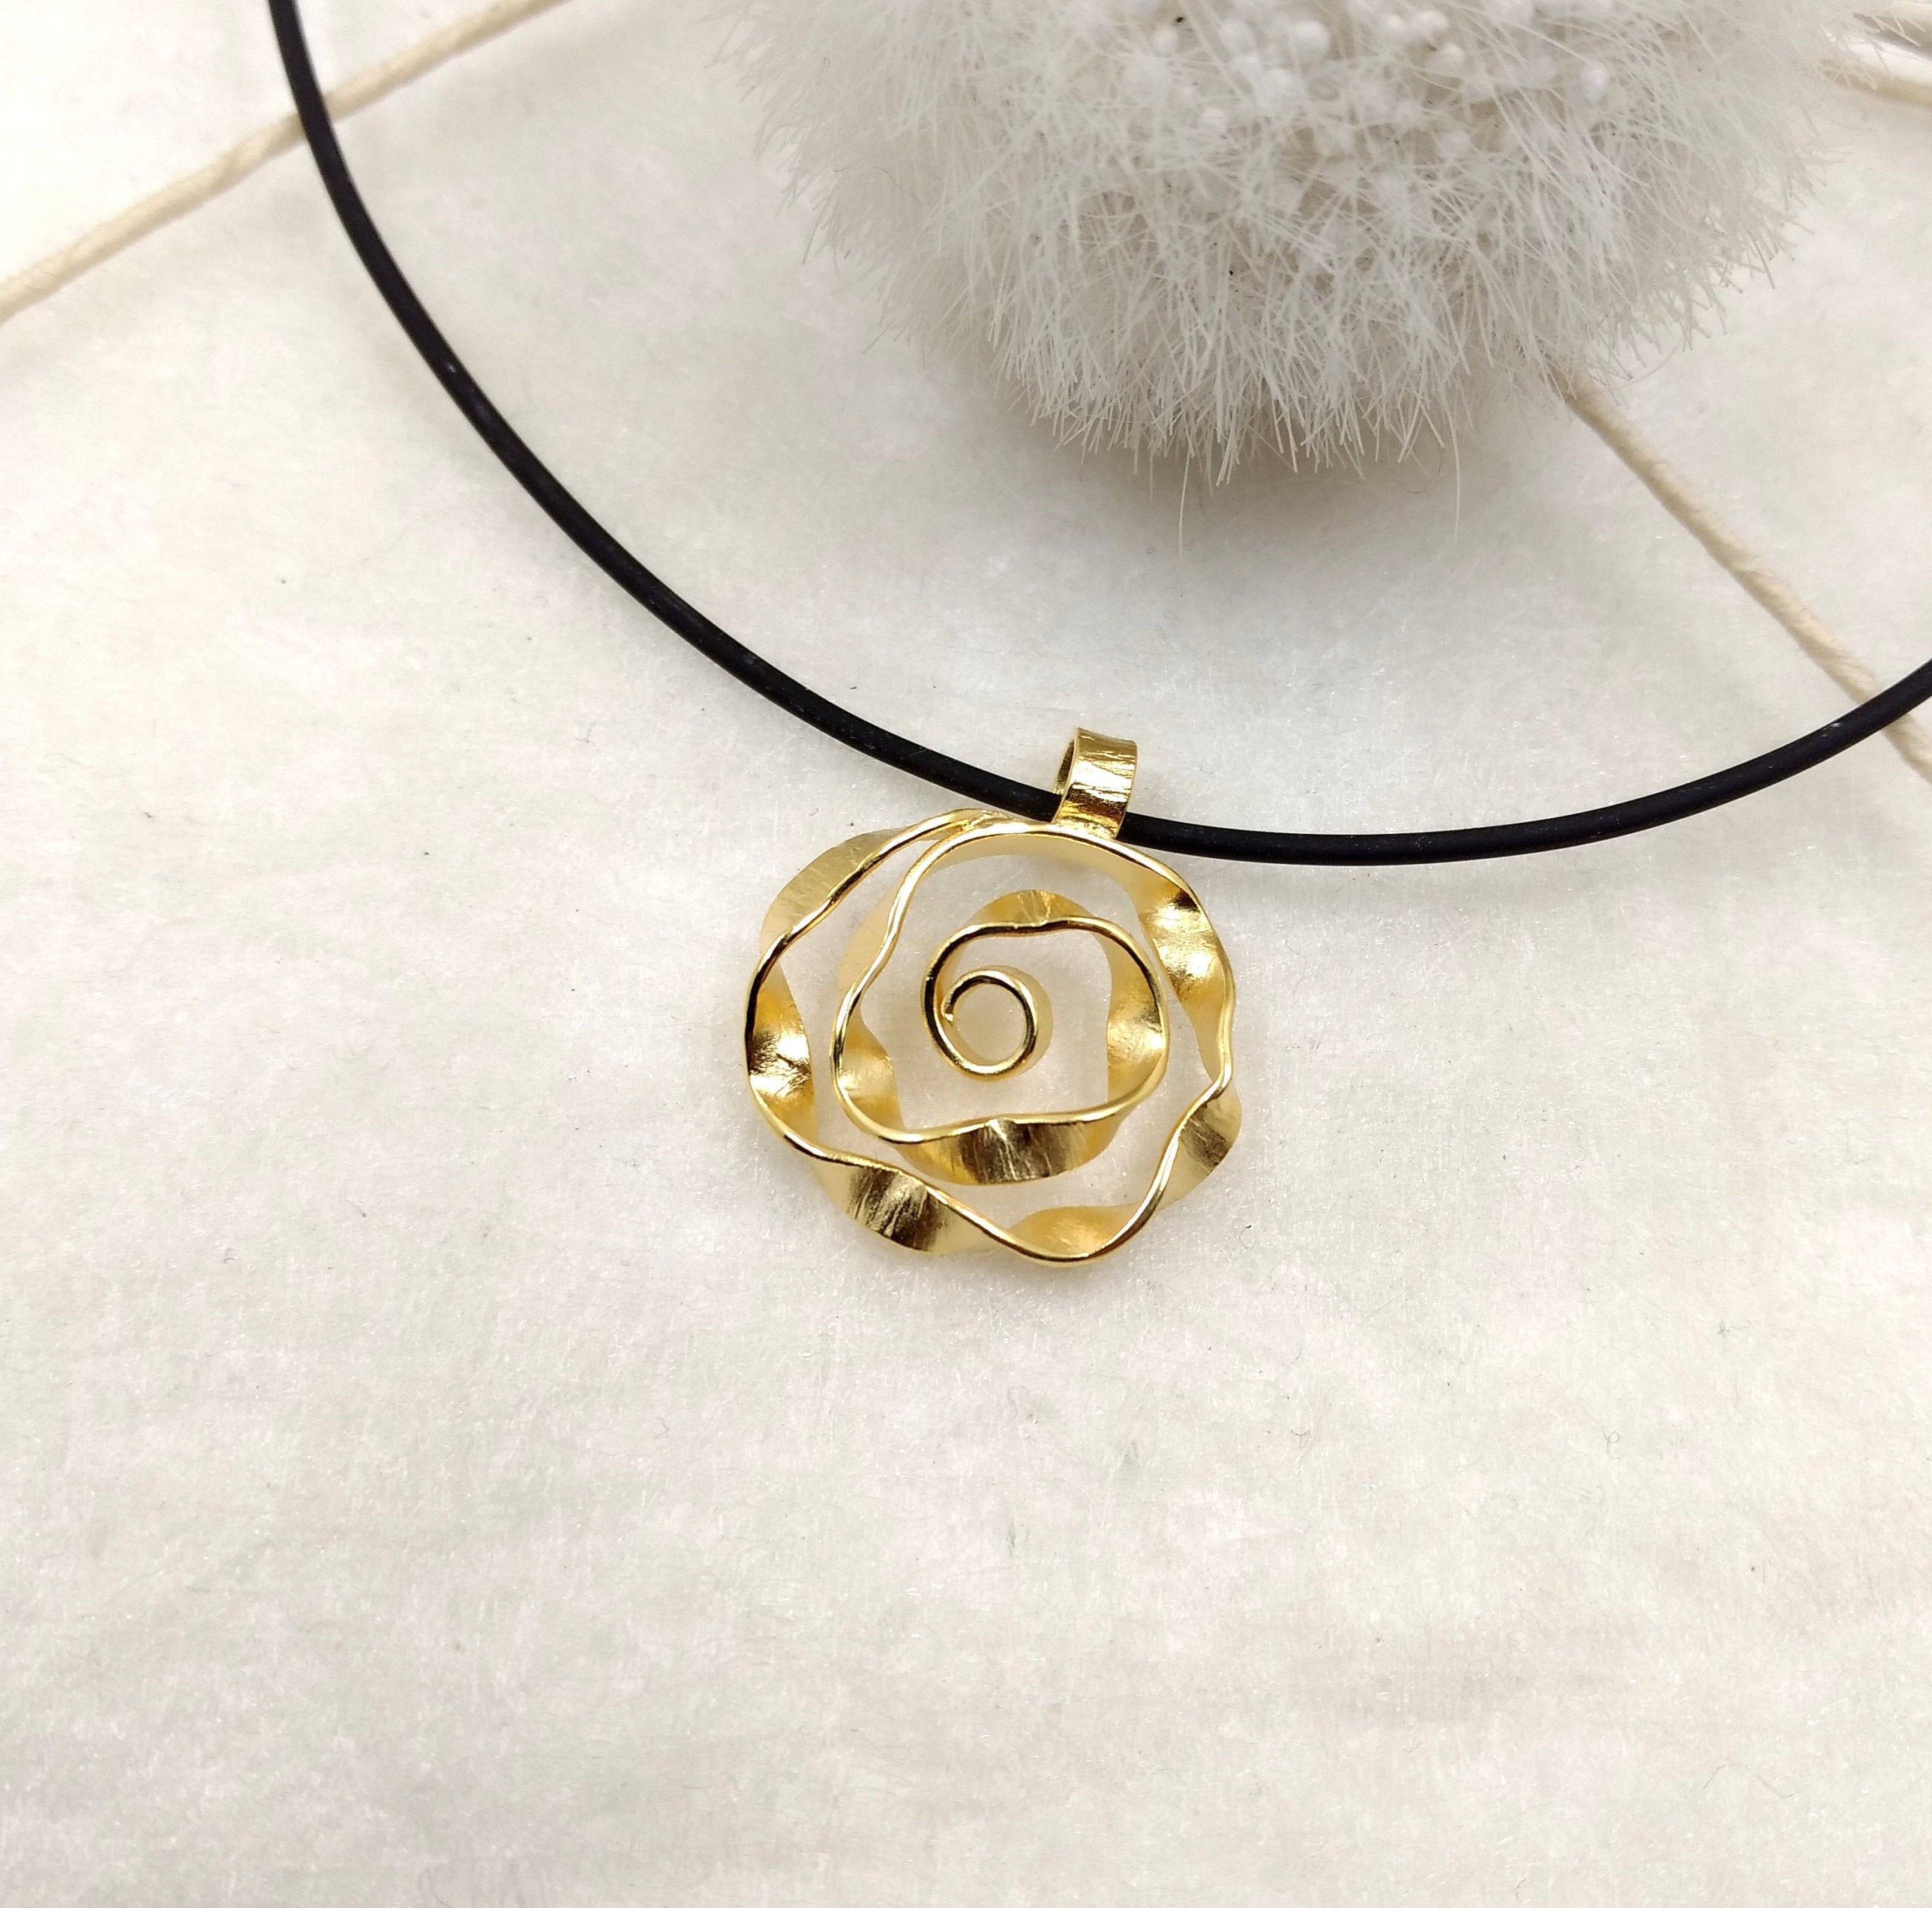 TWisT - small pendant in Sterling Silver or Sterling Silver 18 karat gold plating